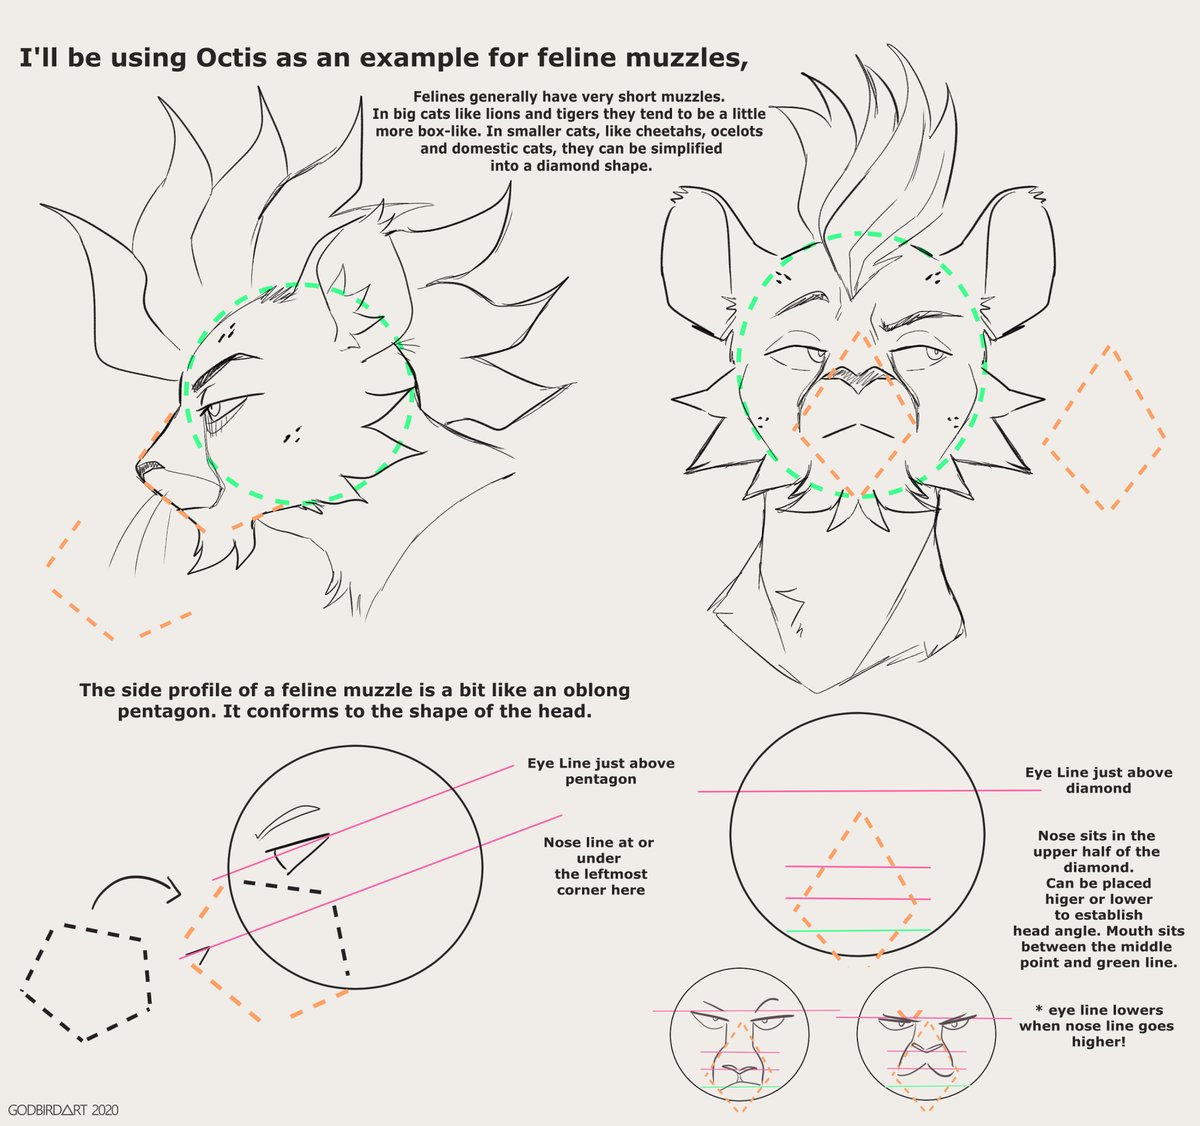 Tobias🌿 On Twitter: "A Couple People Have Asked About Muzzles And How I  Draw Them, So I Whipped Up This Super Quick Little Guide. These Are In My  Own Personal Art Style